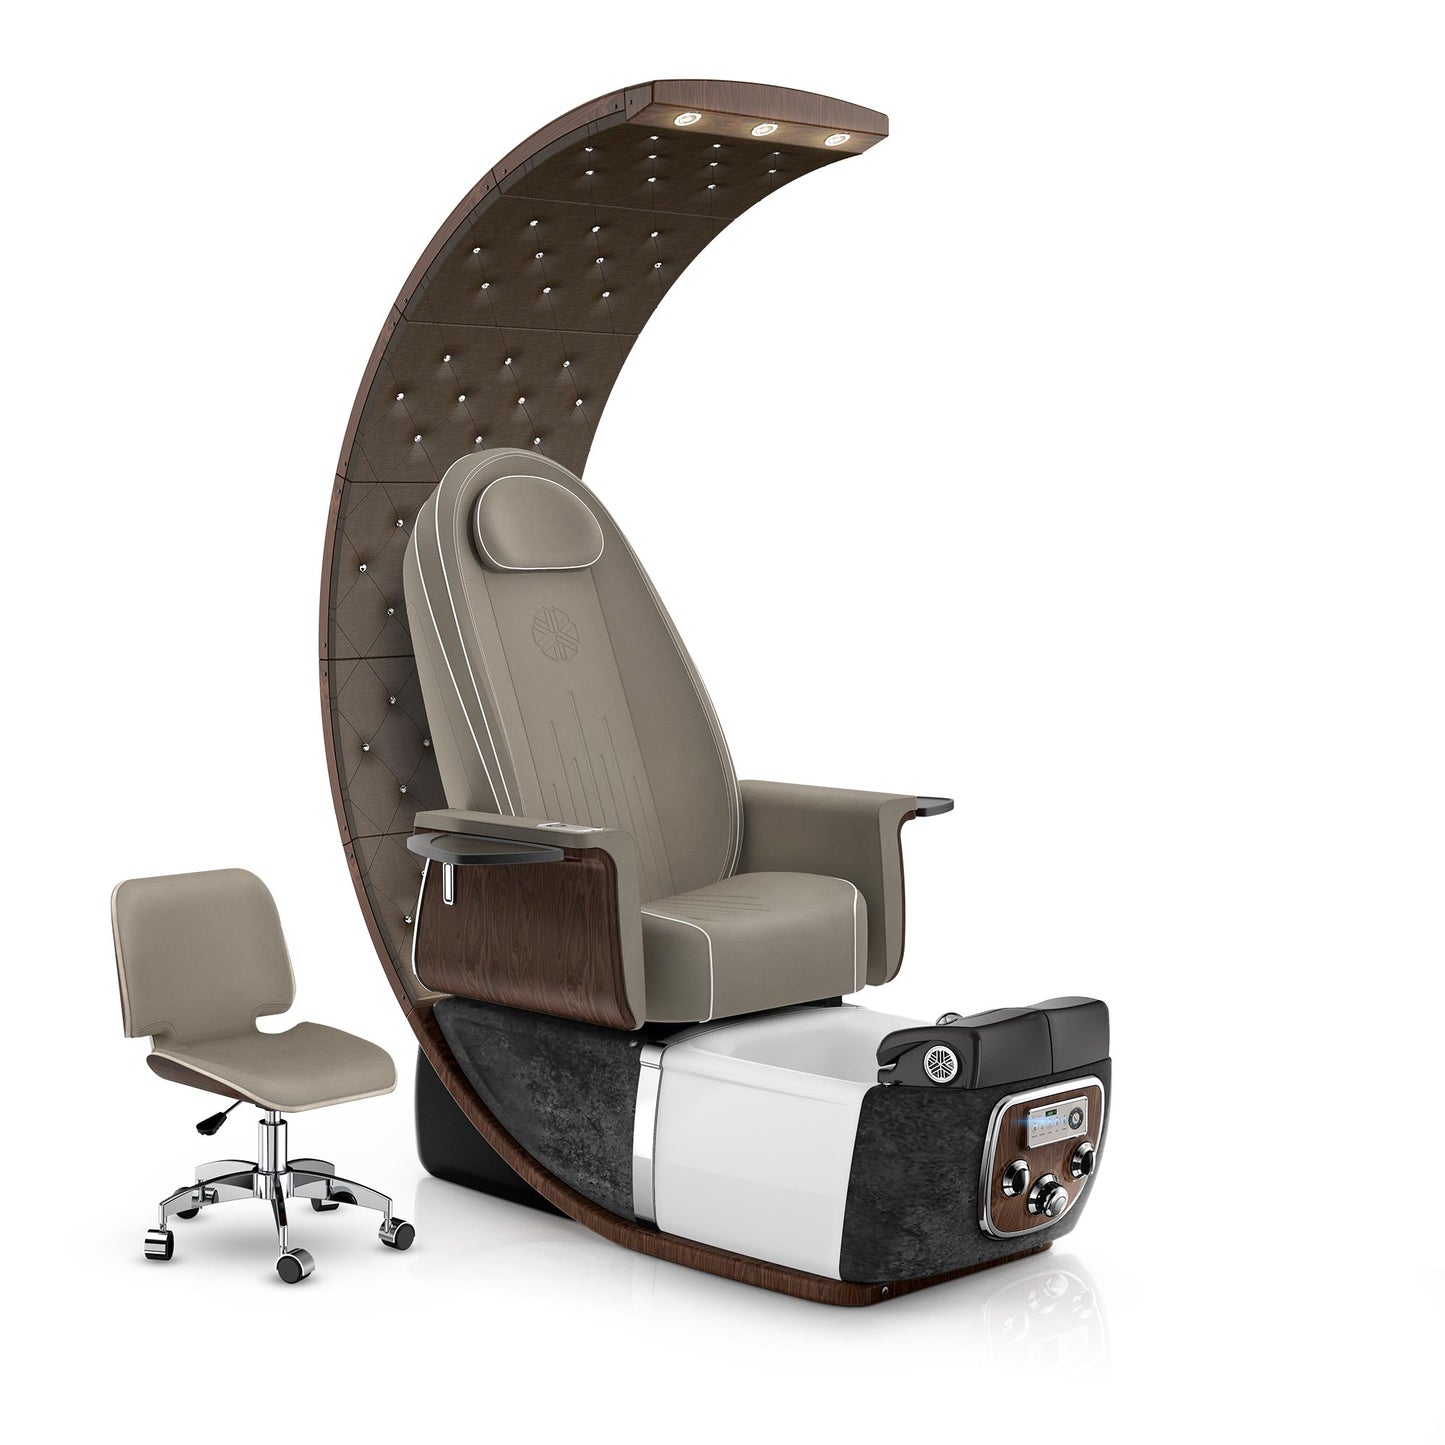 Lexor PRIVÉ Lounge pedicure chair with claystone cushion and black moonstone spa base